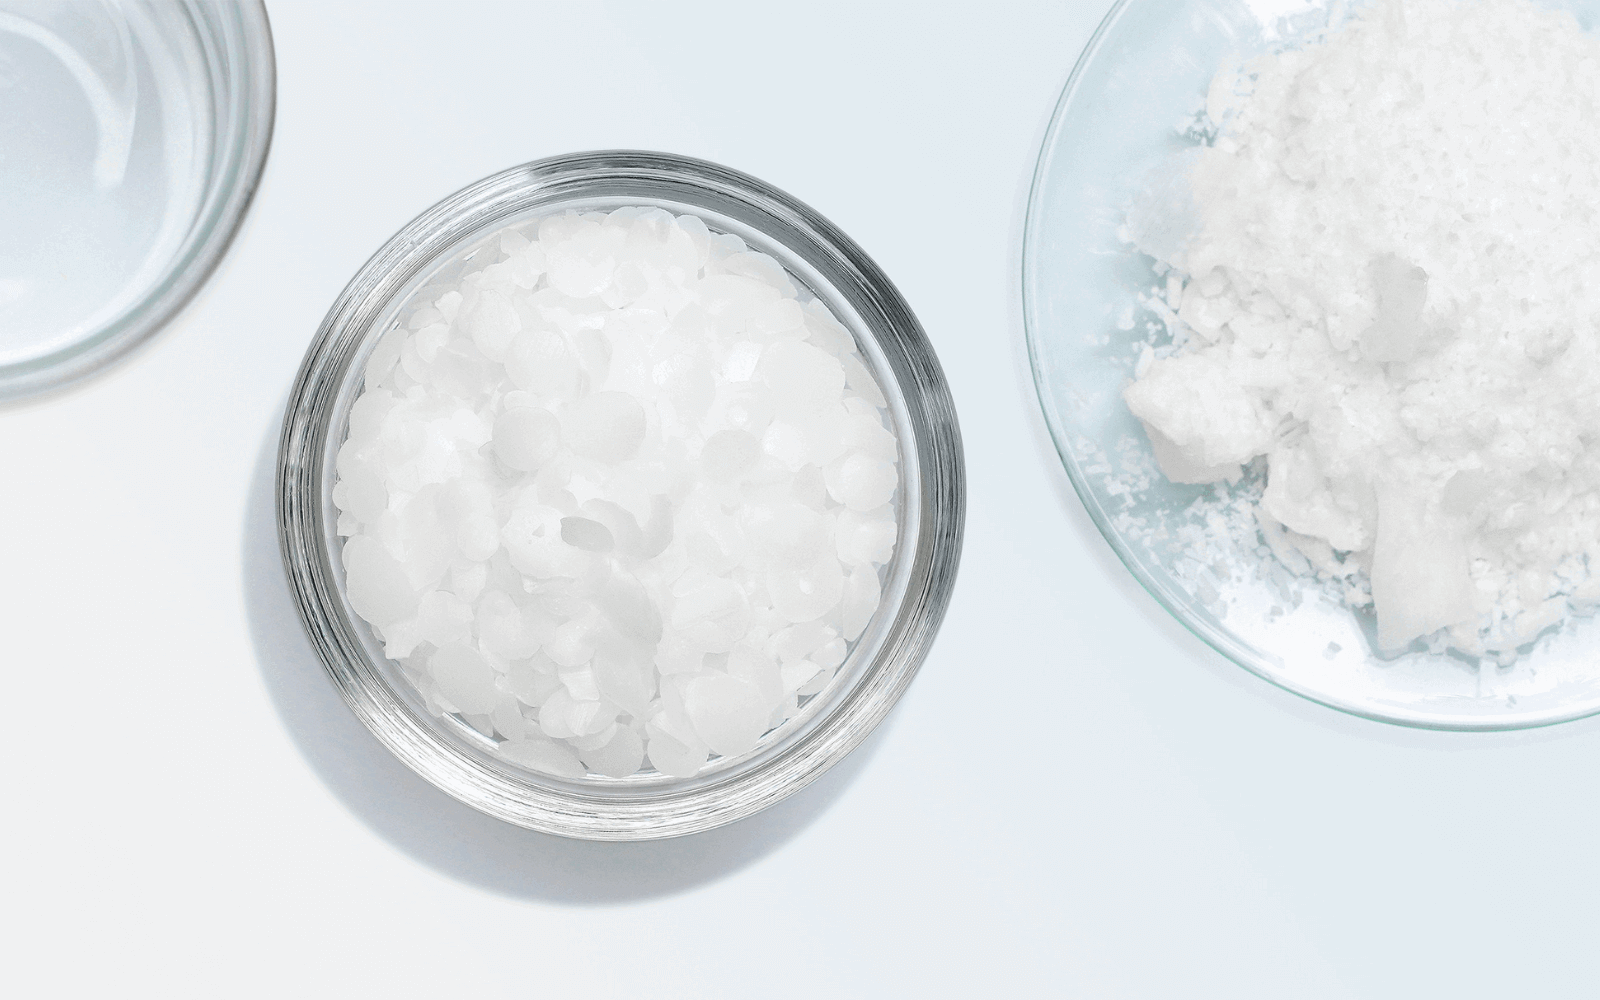 Difference Between Cetyl Alcohol and Cetearyl Alcohol